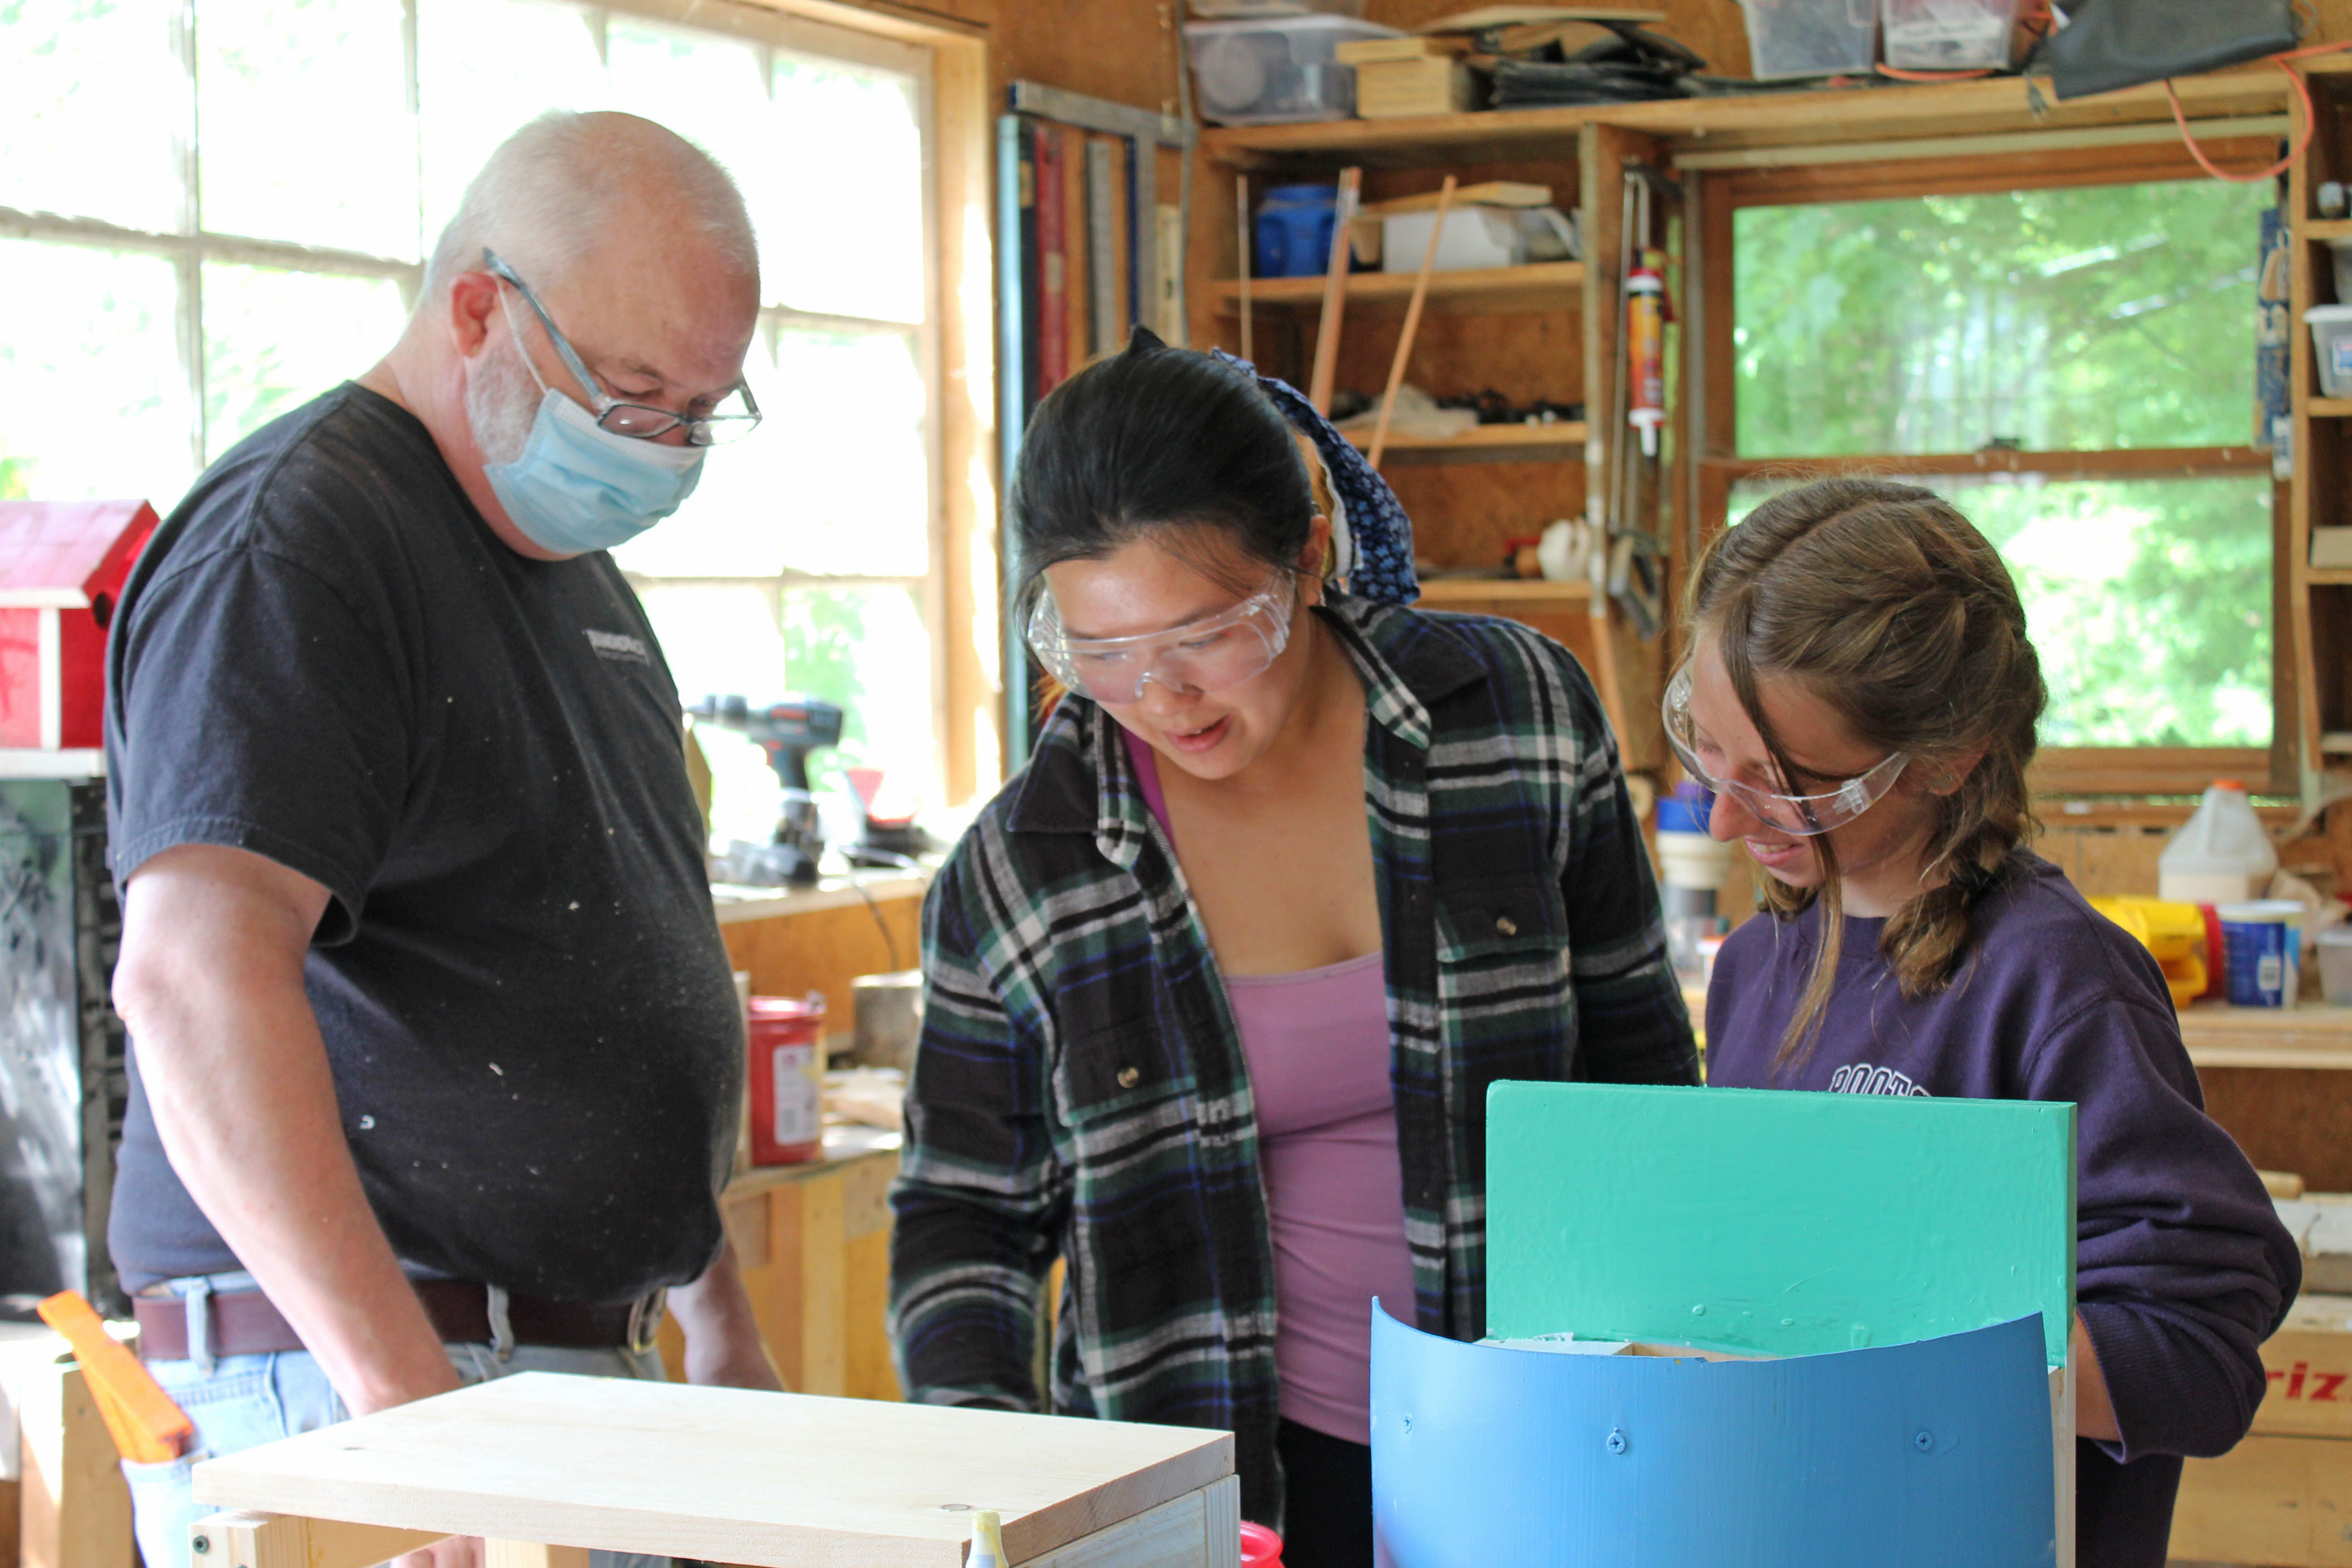 Mark Peters, Anna Zheng and Remi Koebel work on a project in wood working class at Camp Spring Creek in Bakersville. The camp has had to accommodate restrictions and guidelines regarding the ongoing coronavirus pandemic. (MNJ photo/Juliana Walker)